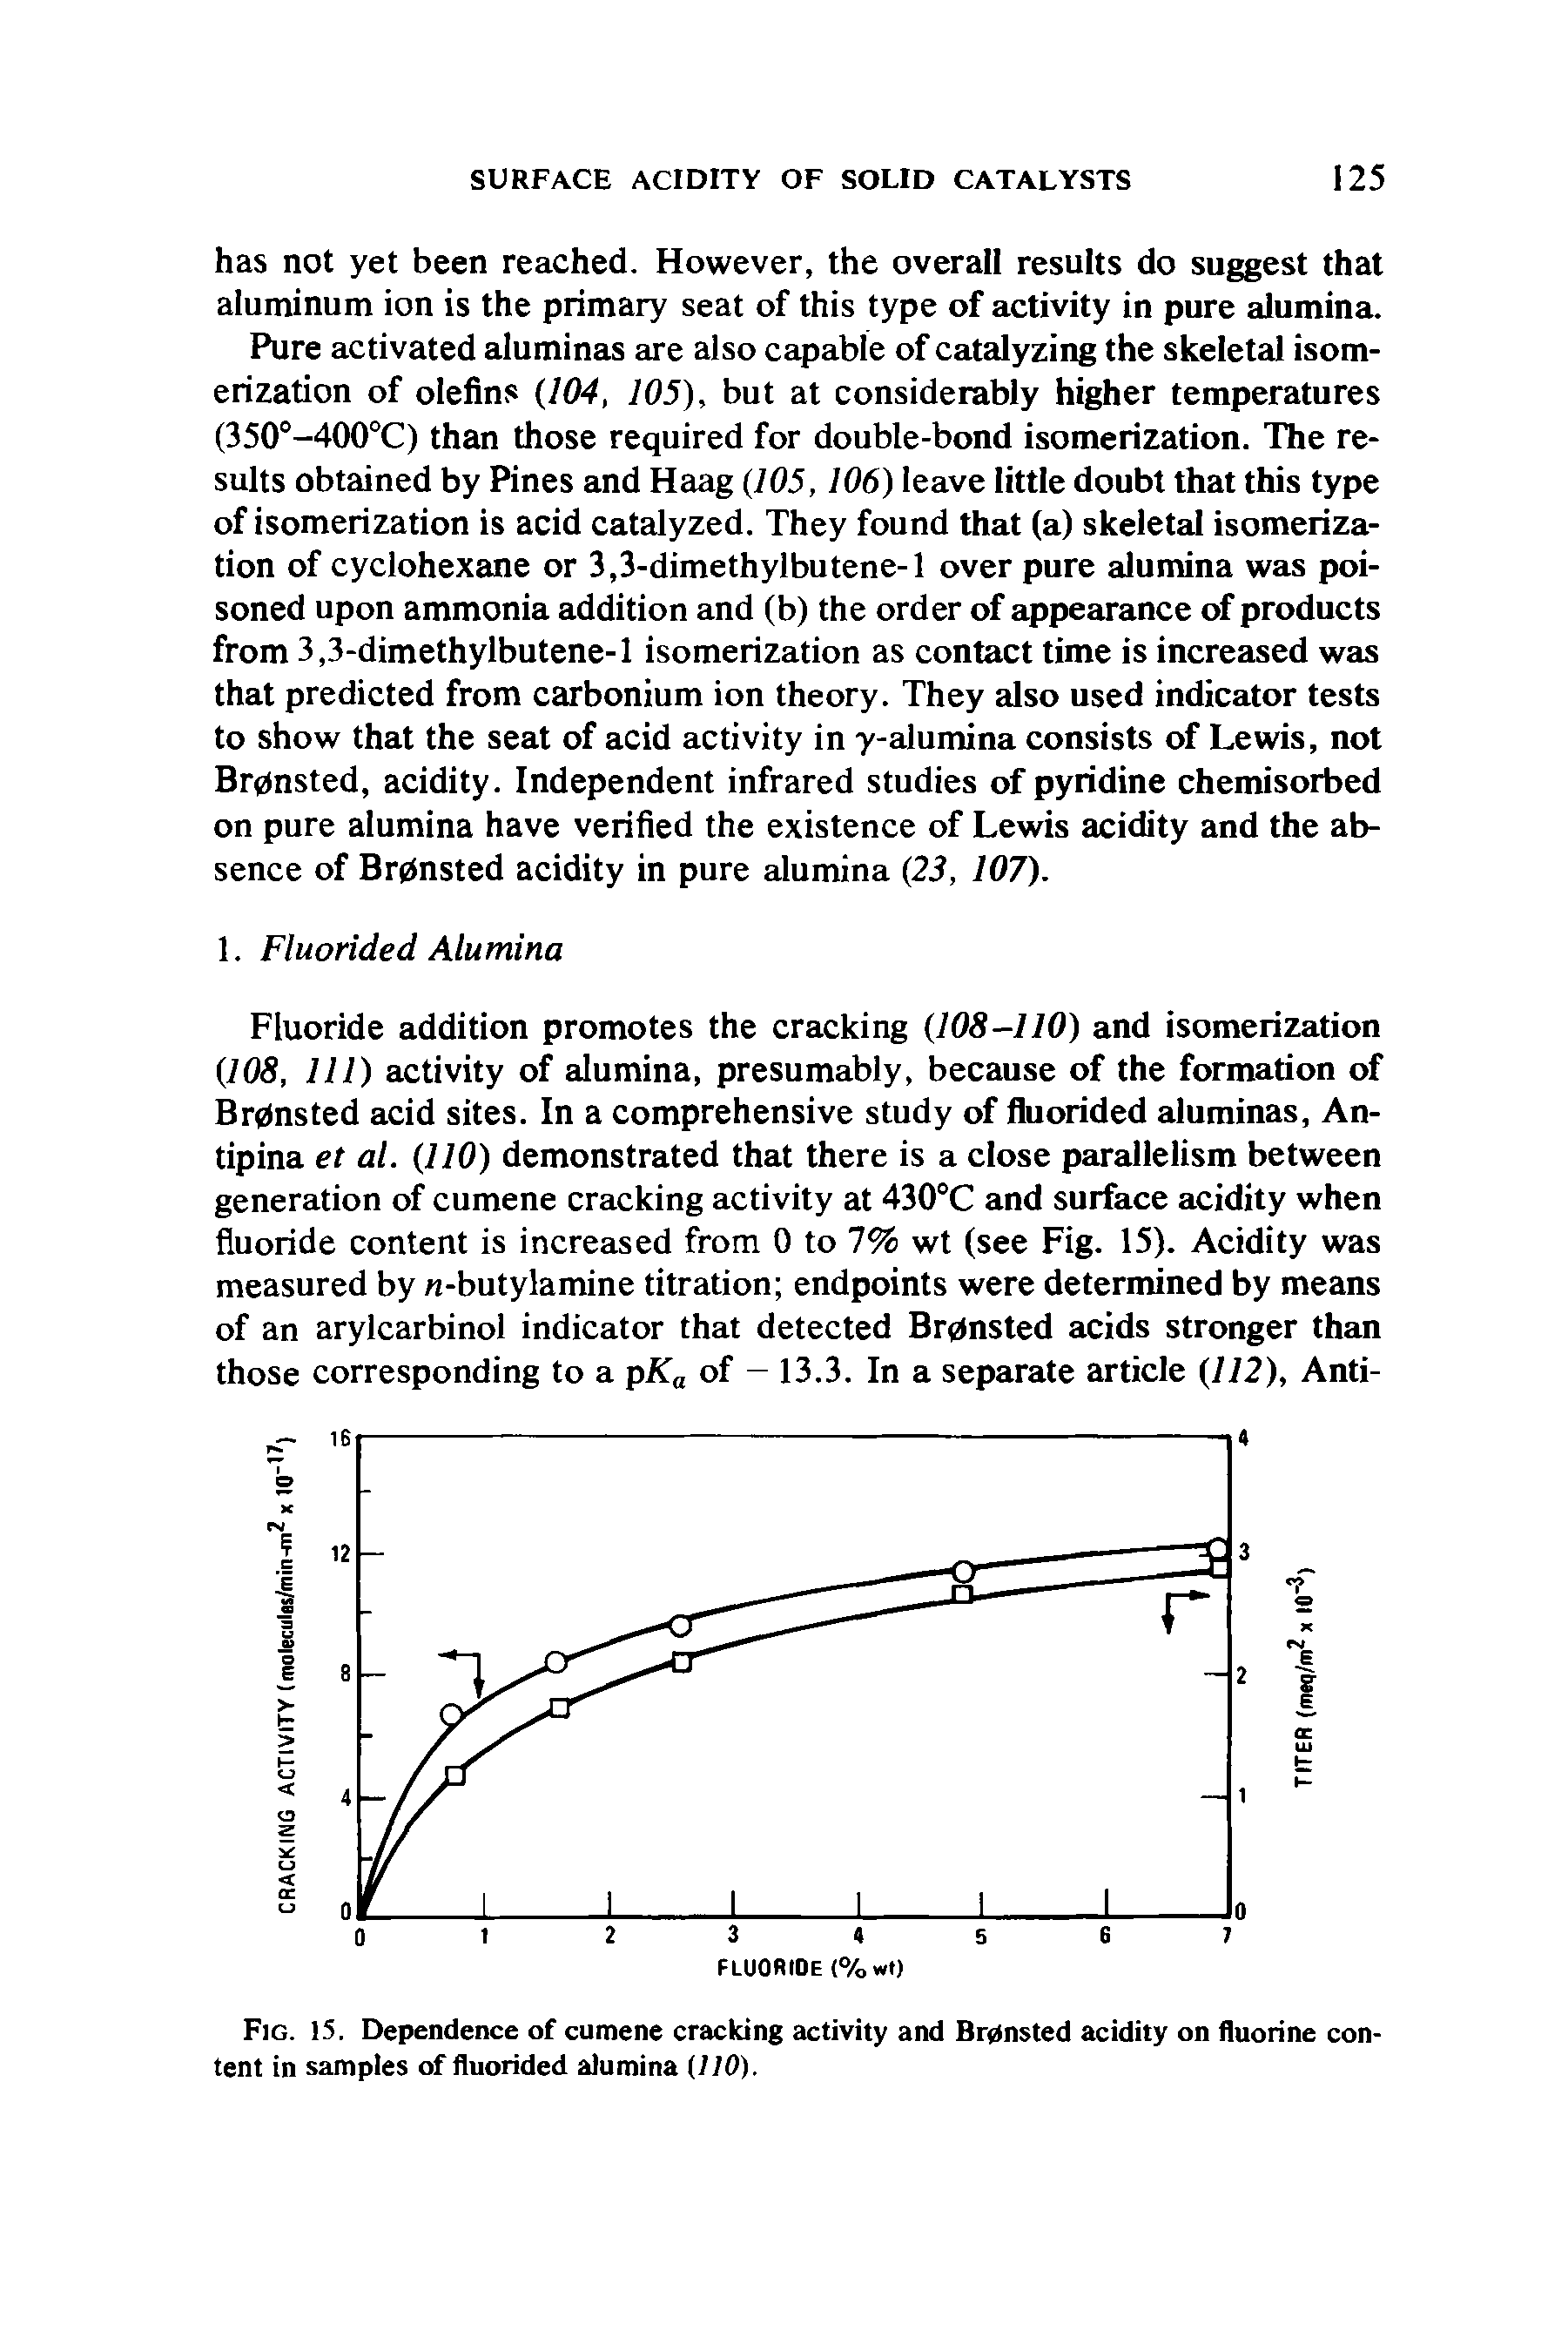 Fig. 15. Dependence of cumene cracking activity and Br0nsted acidity on fluorine content in samples of fluorided alumina U10).